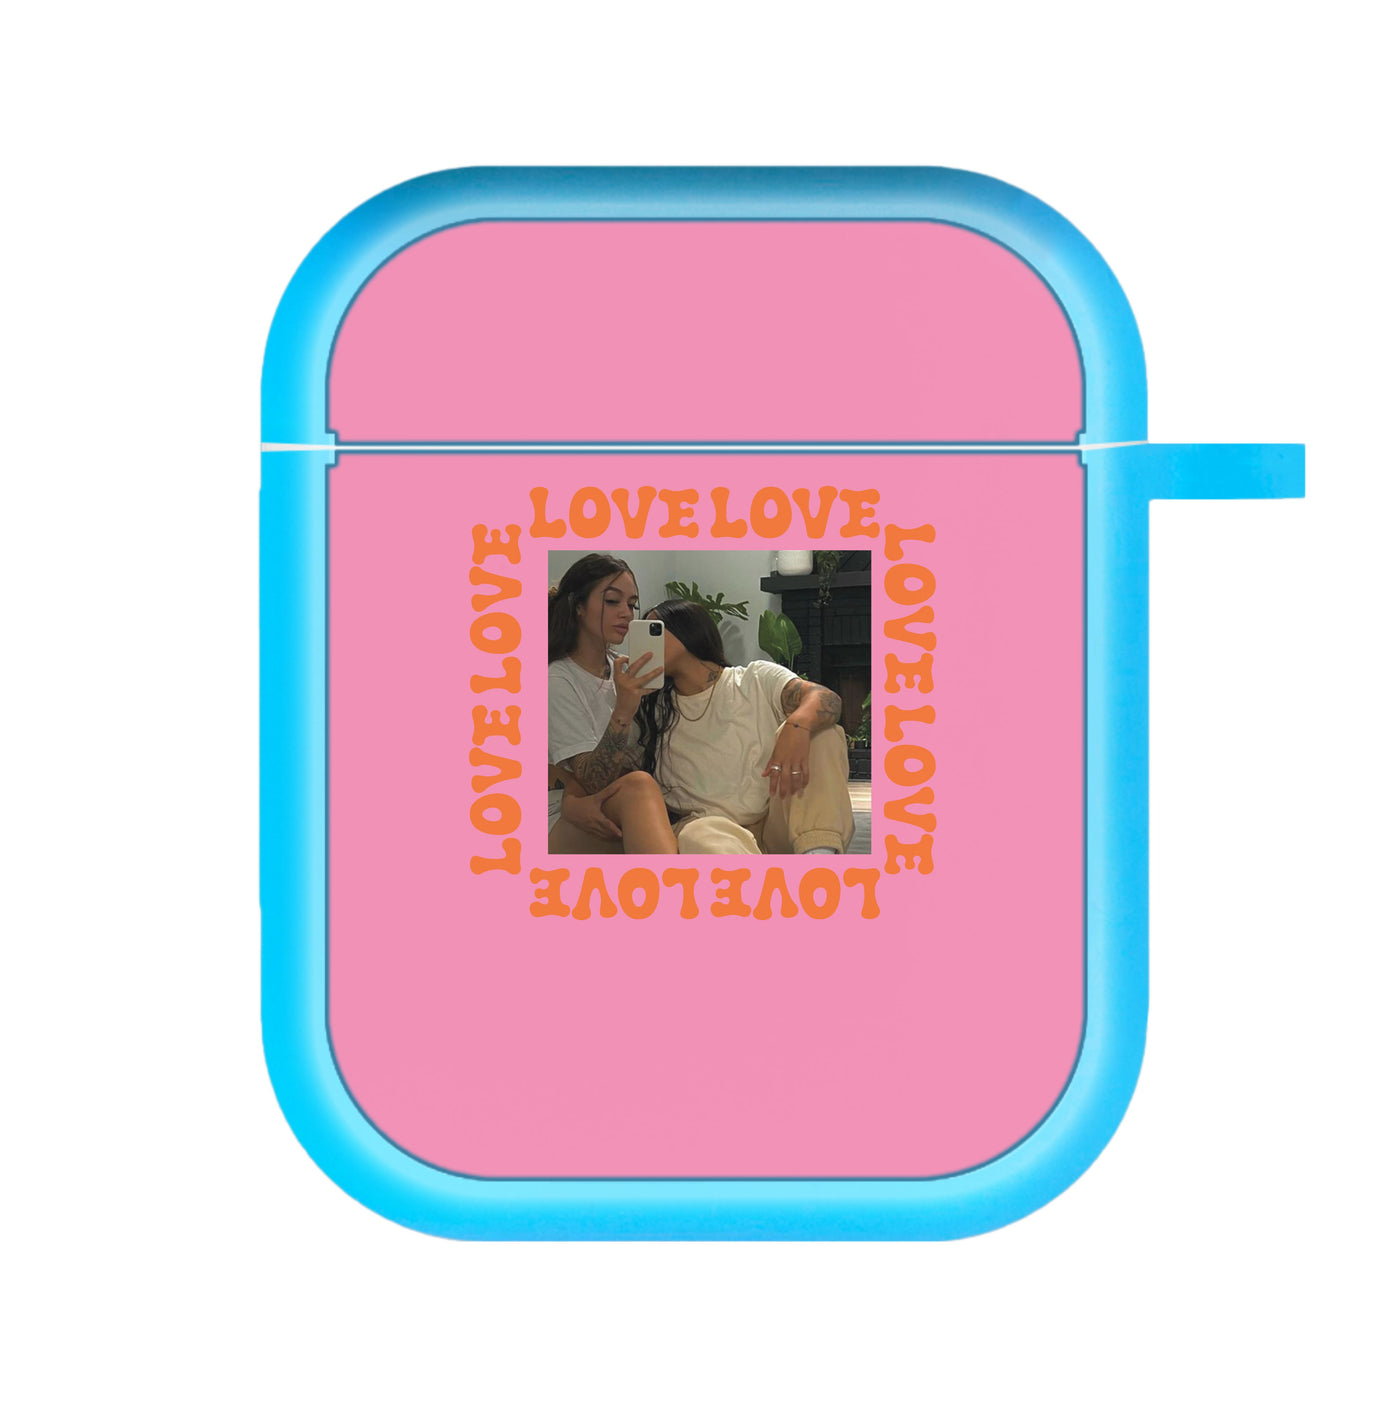 Love, Love, Love - Personalised Couples AirPods Case